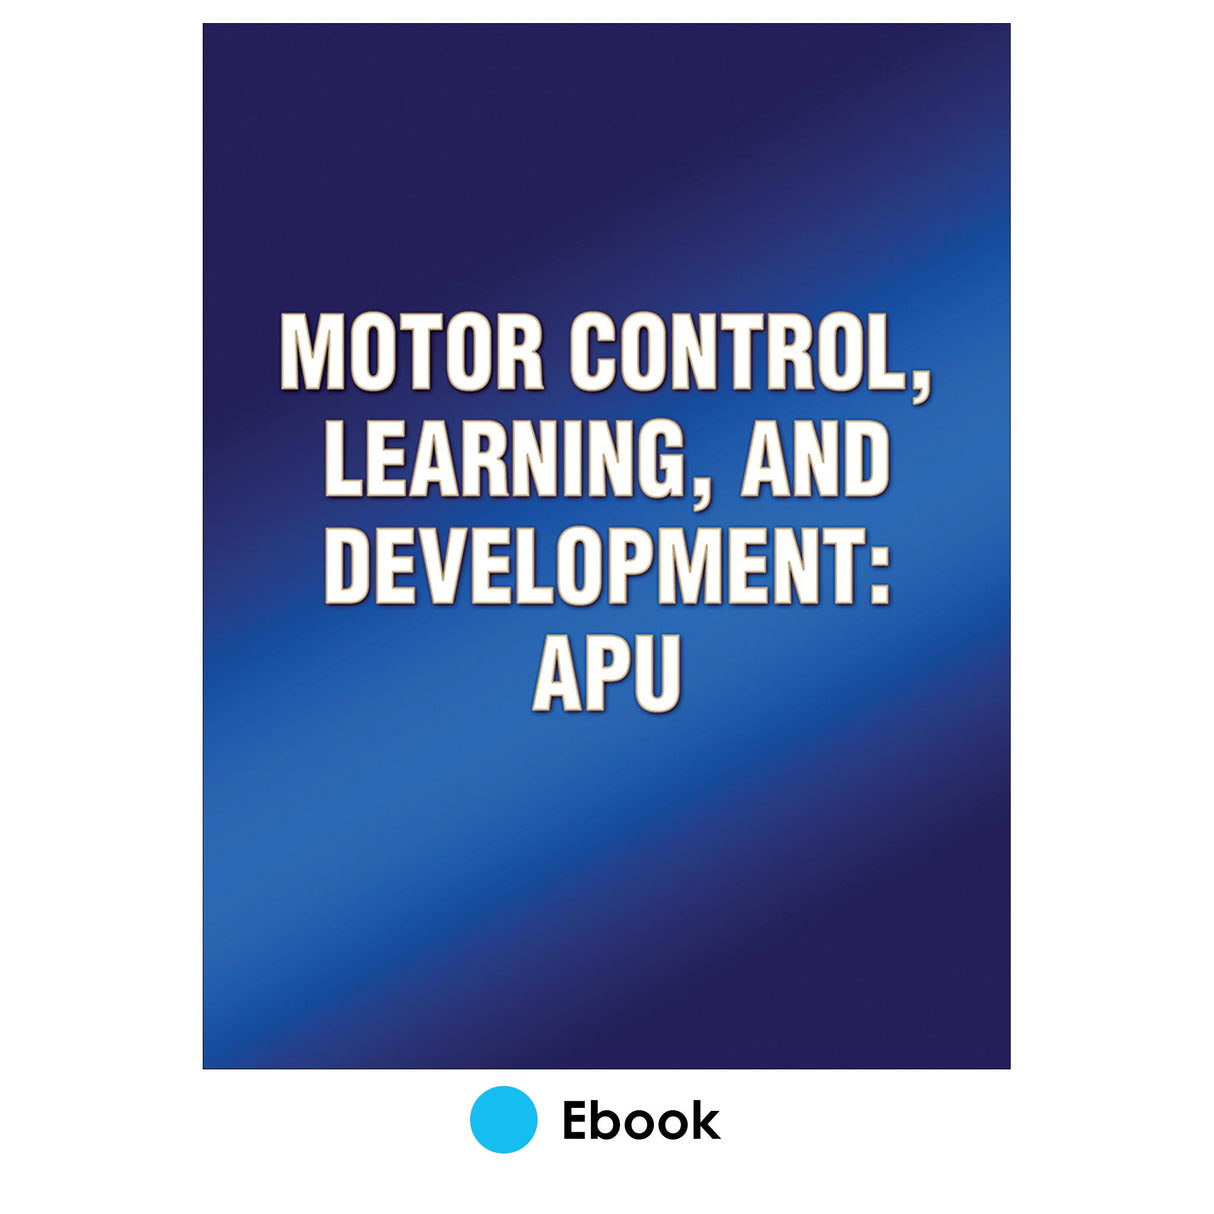 Motor Control, Learning, and Development: APU